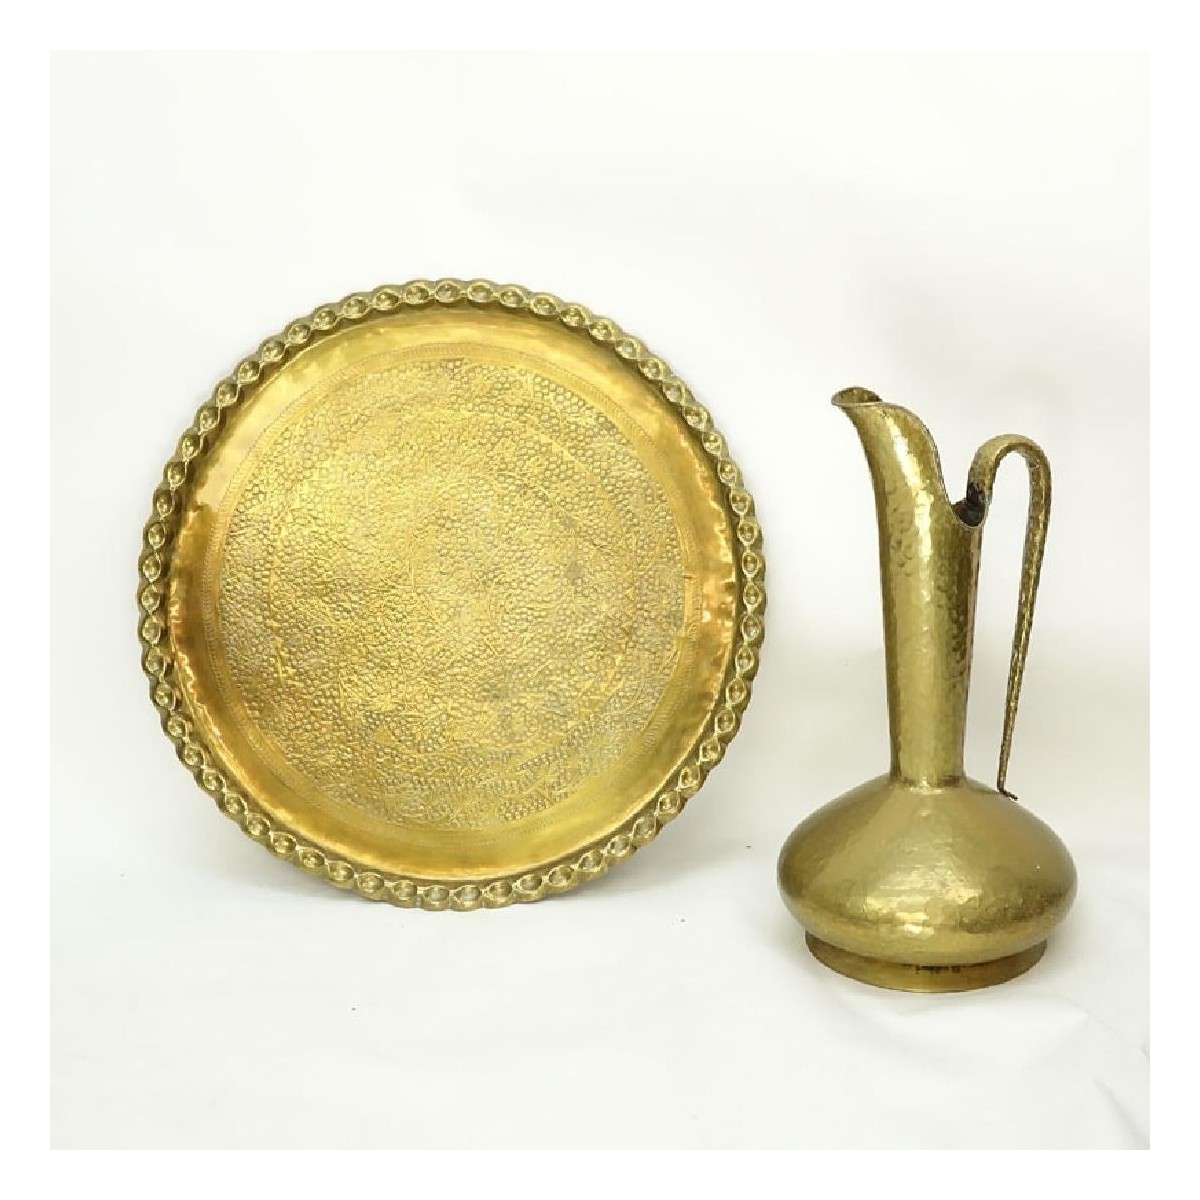 Grouping of a Large Brass Charger and Ewer